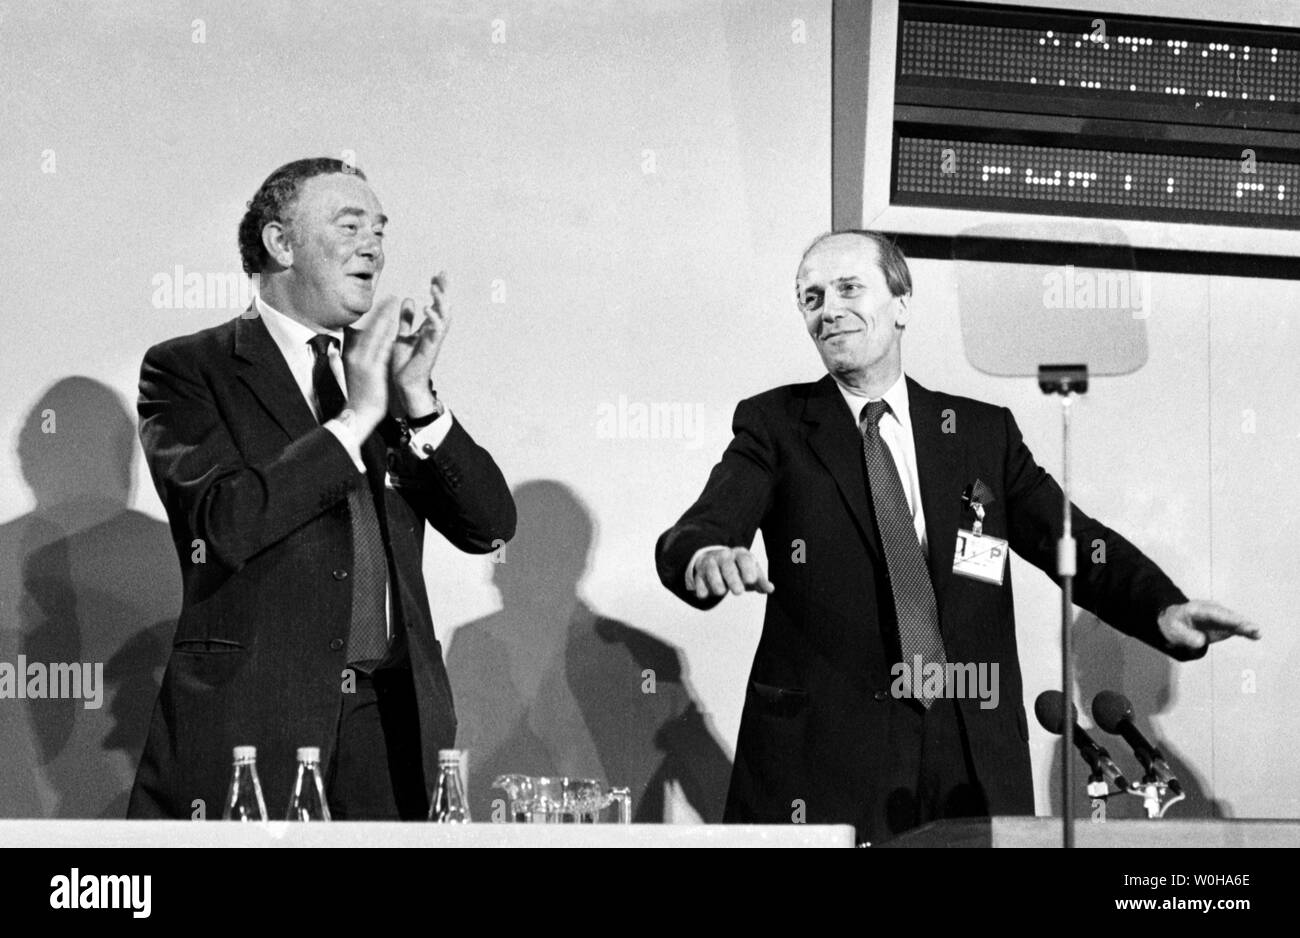 Tory party chairman Norman Tebbit (r) appeals for quiet during an enthusiastic reception to his speech at the party's conference in Blackpool. Tory party vice-chairman Peter Morrison (l) stands applauding.  *WIREPHOTO Stock Photo